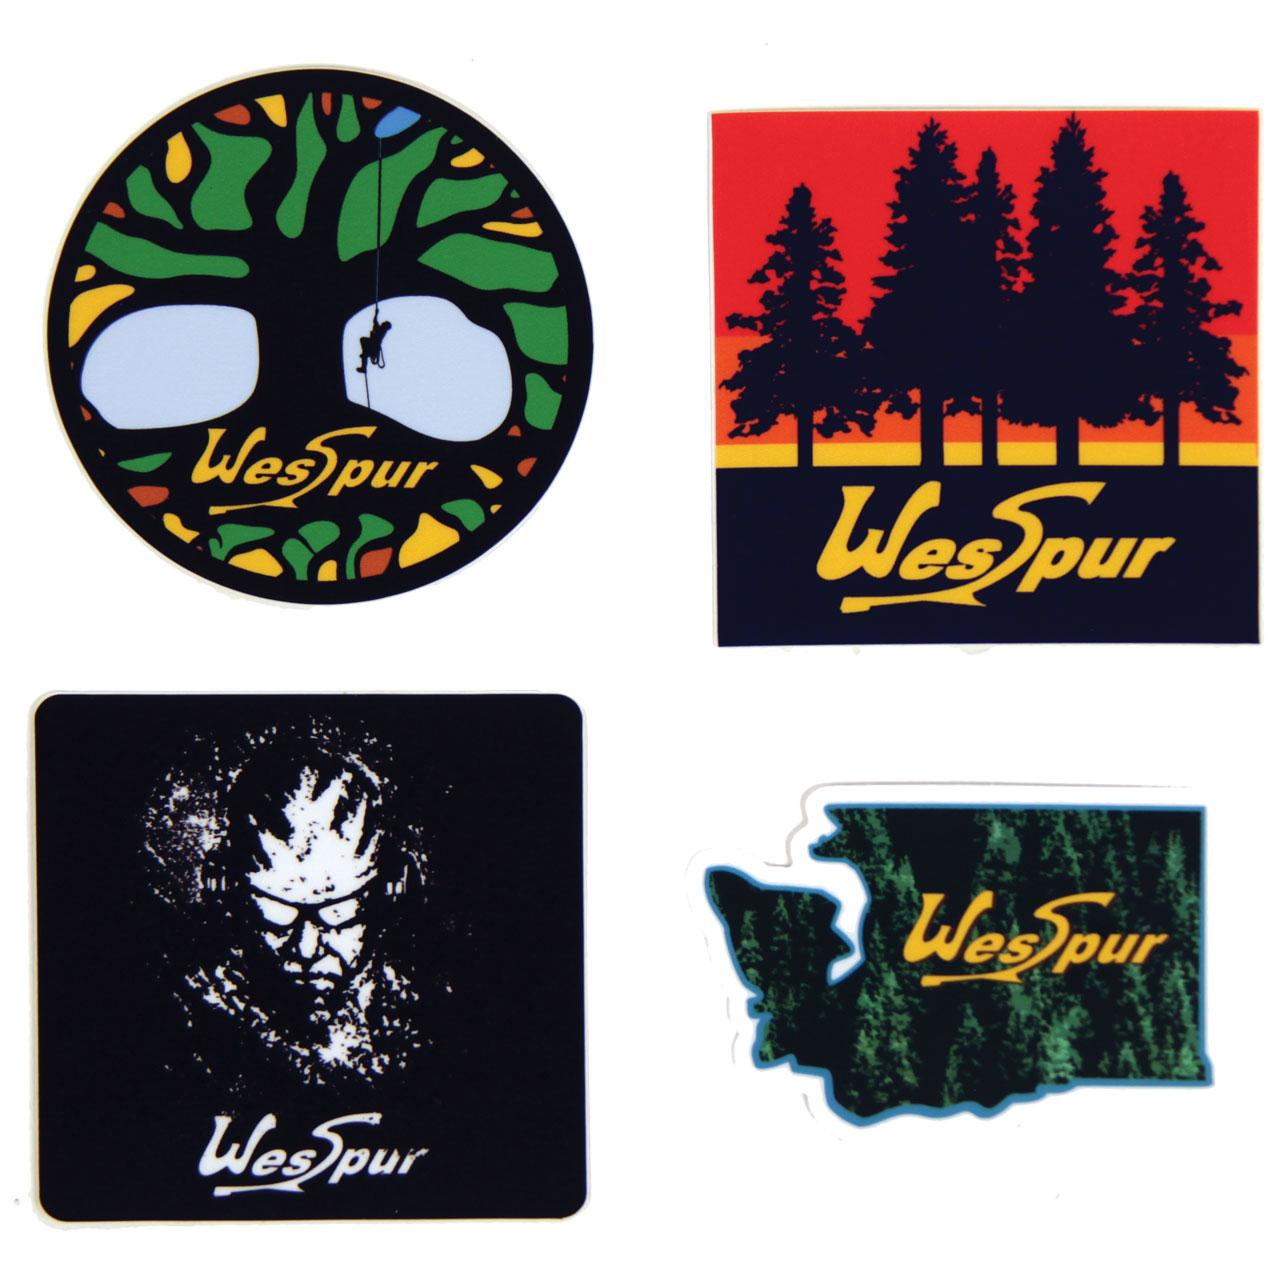 free wesspur tree equipment stickers